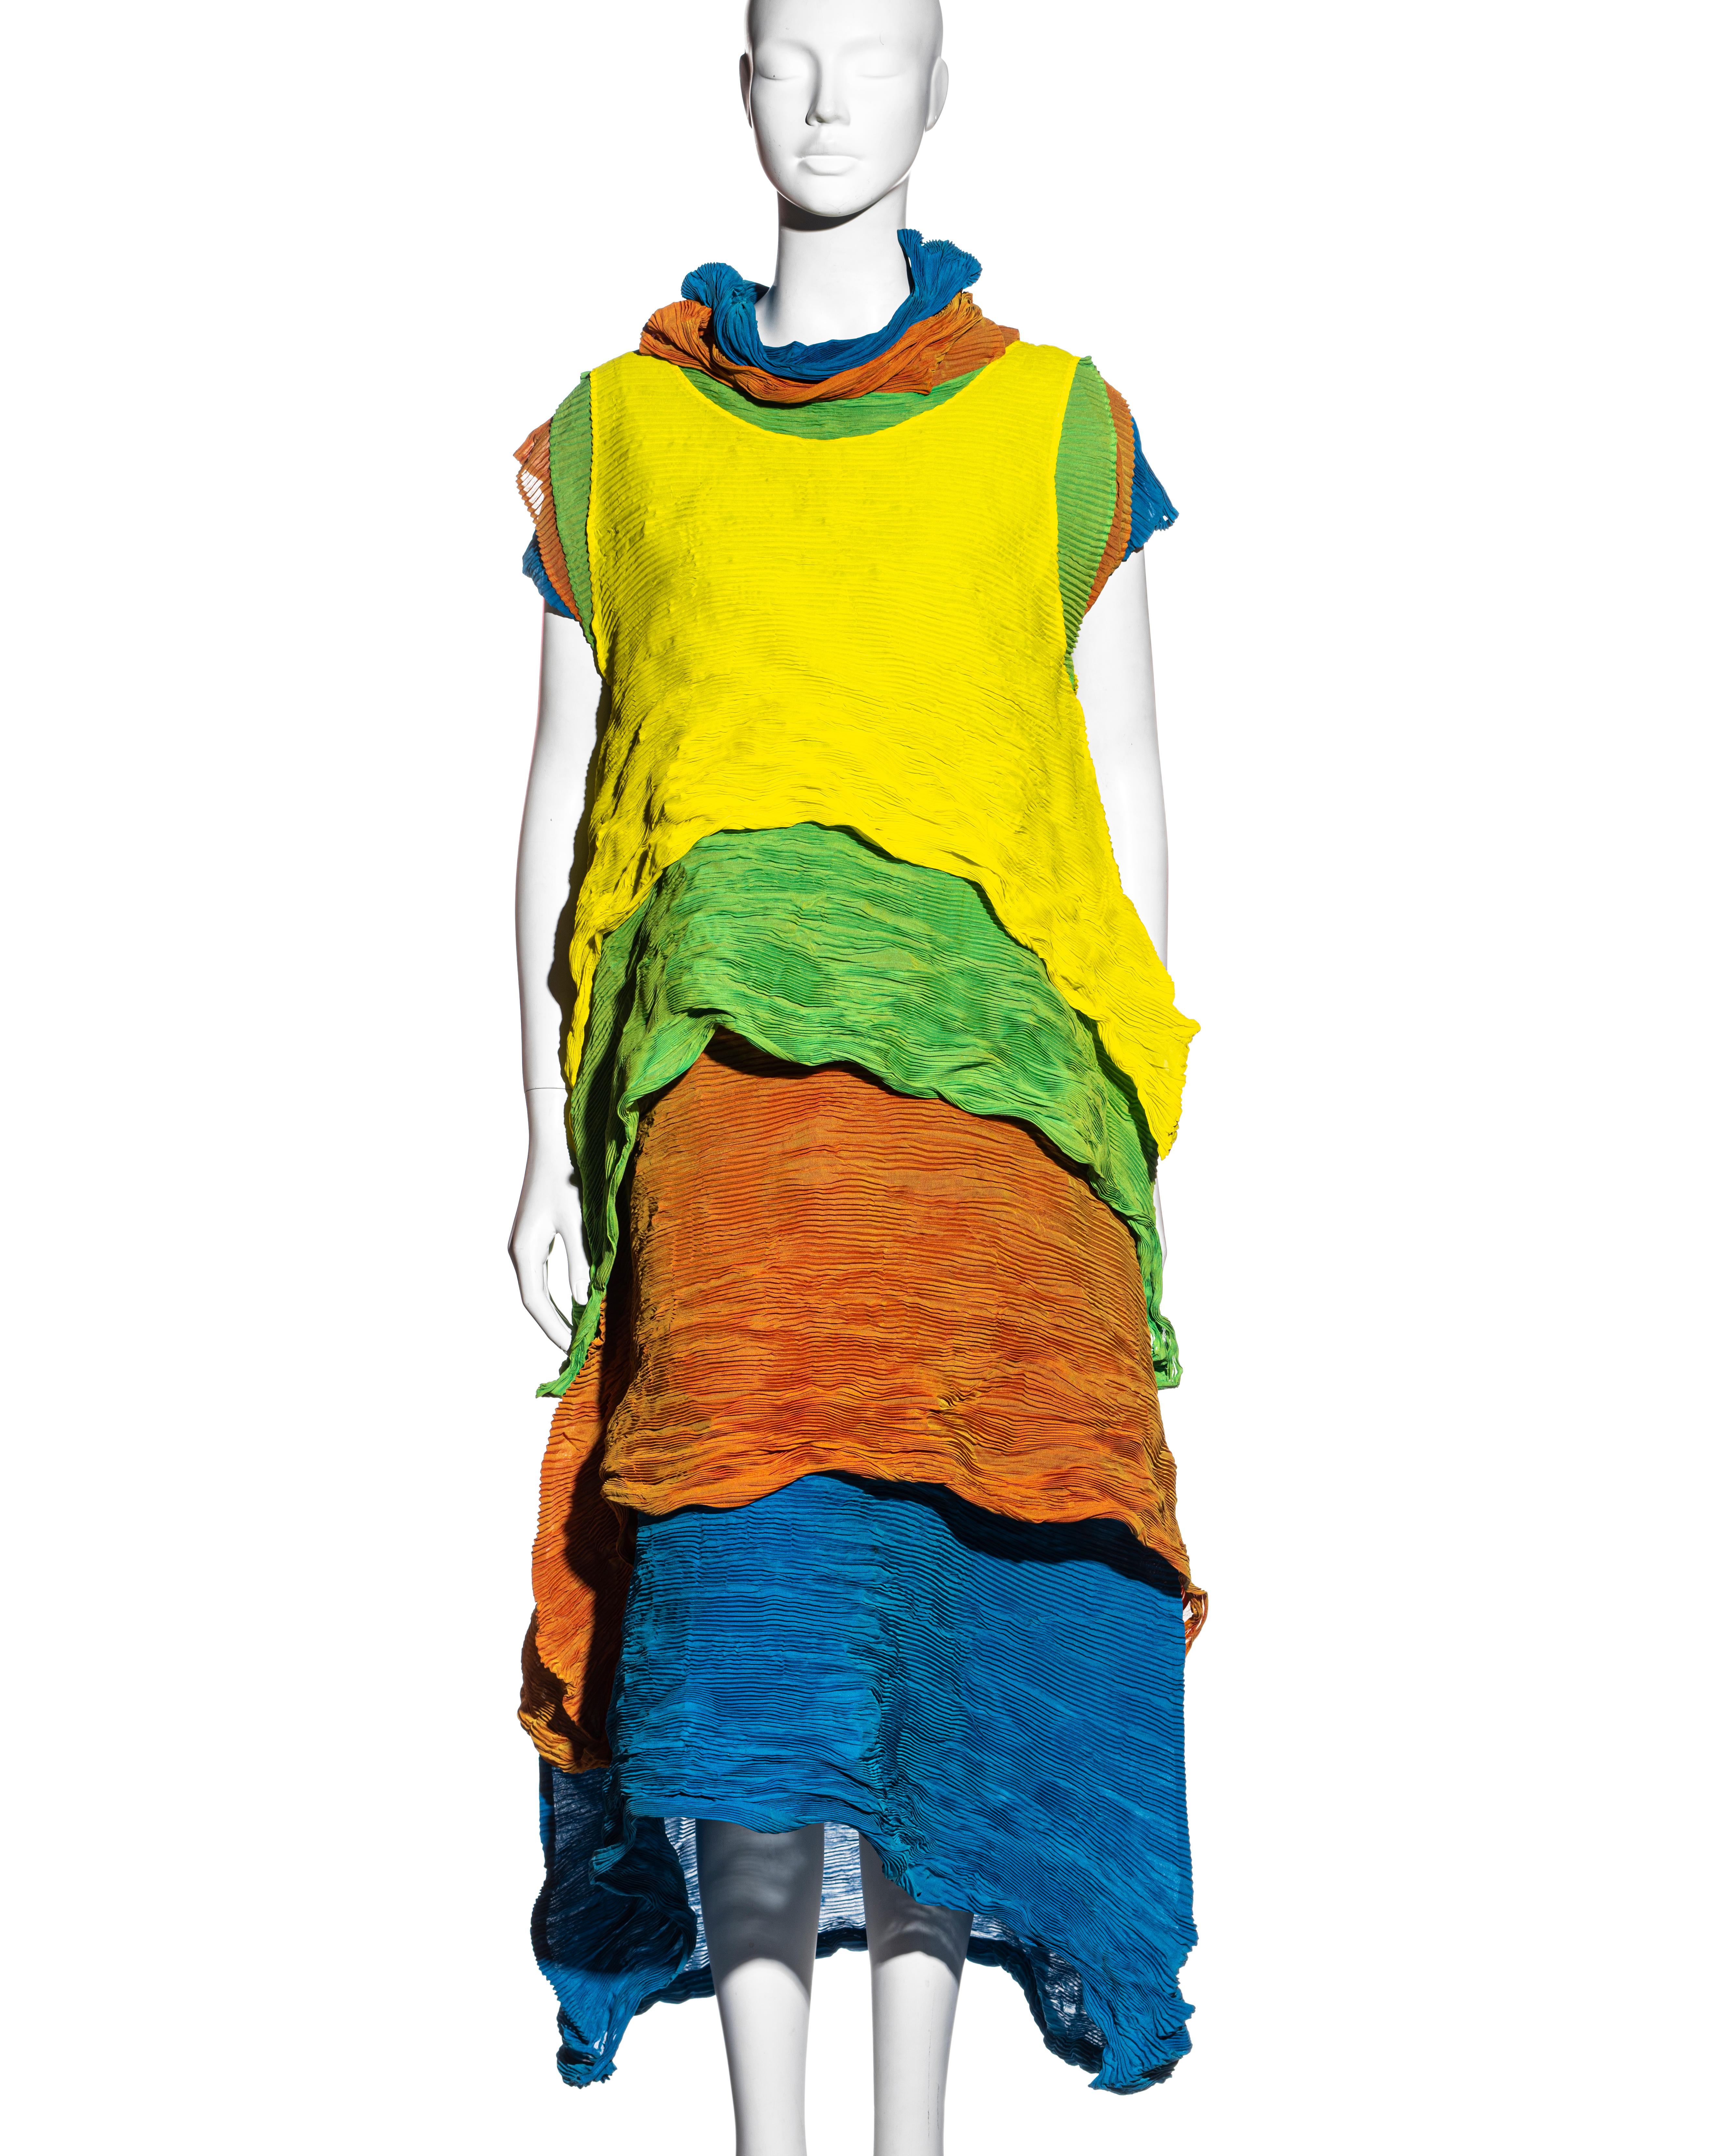 ▪ Issey Miyake rare layered pleated dress
▪ Consisting of four-layered individual garments
▪ A-line shape 
▪ Designed to bounce up and down when worn 
▪ Yellow, green, orange, and blue
▪ 100% polyester 
▪ Size Medium
▪ Spring-Summer 1993